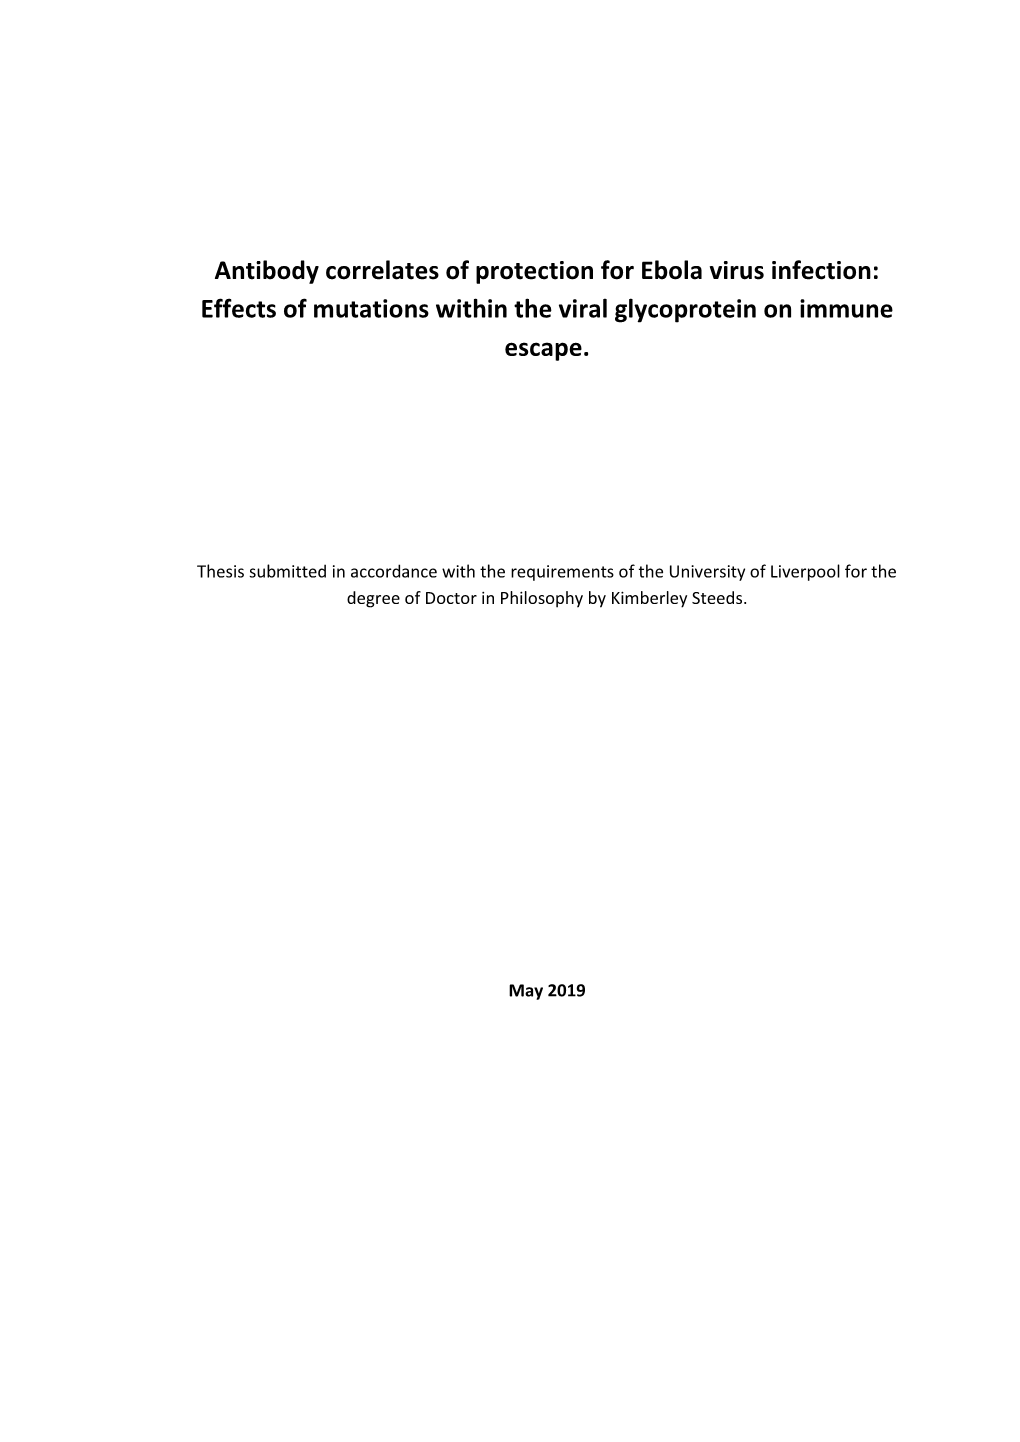 Antibody Correlates of Protection for Ebola Virus Infection: Effects of Mutations Within the Viral Glycoprotein on Immune Escape